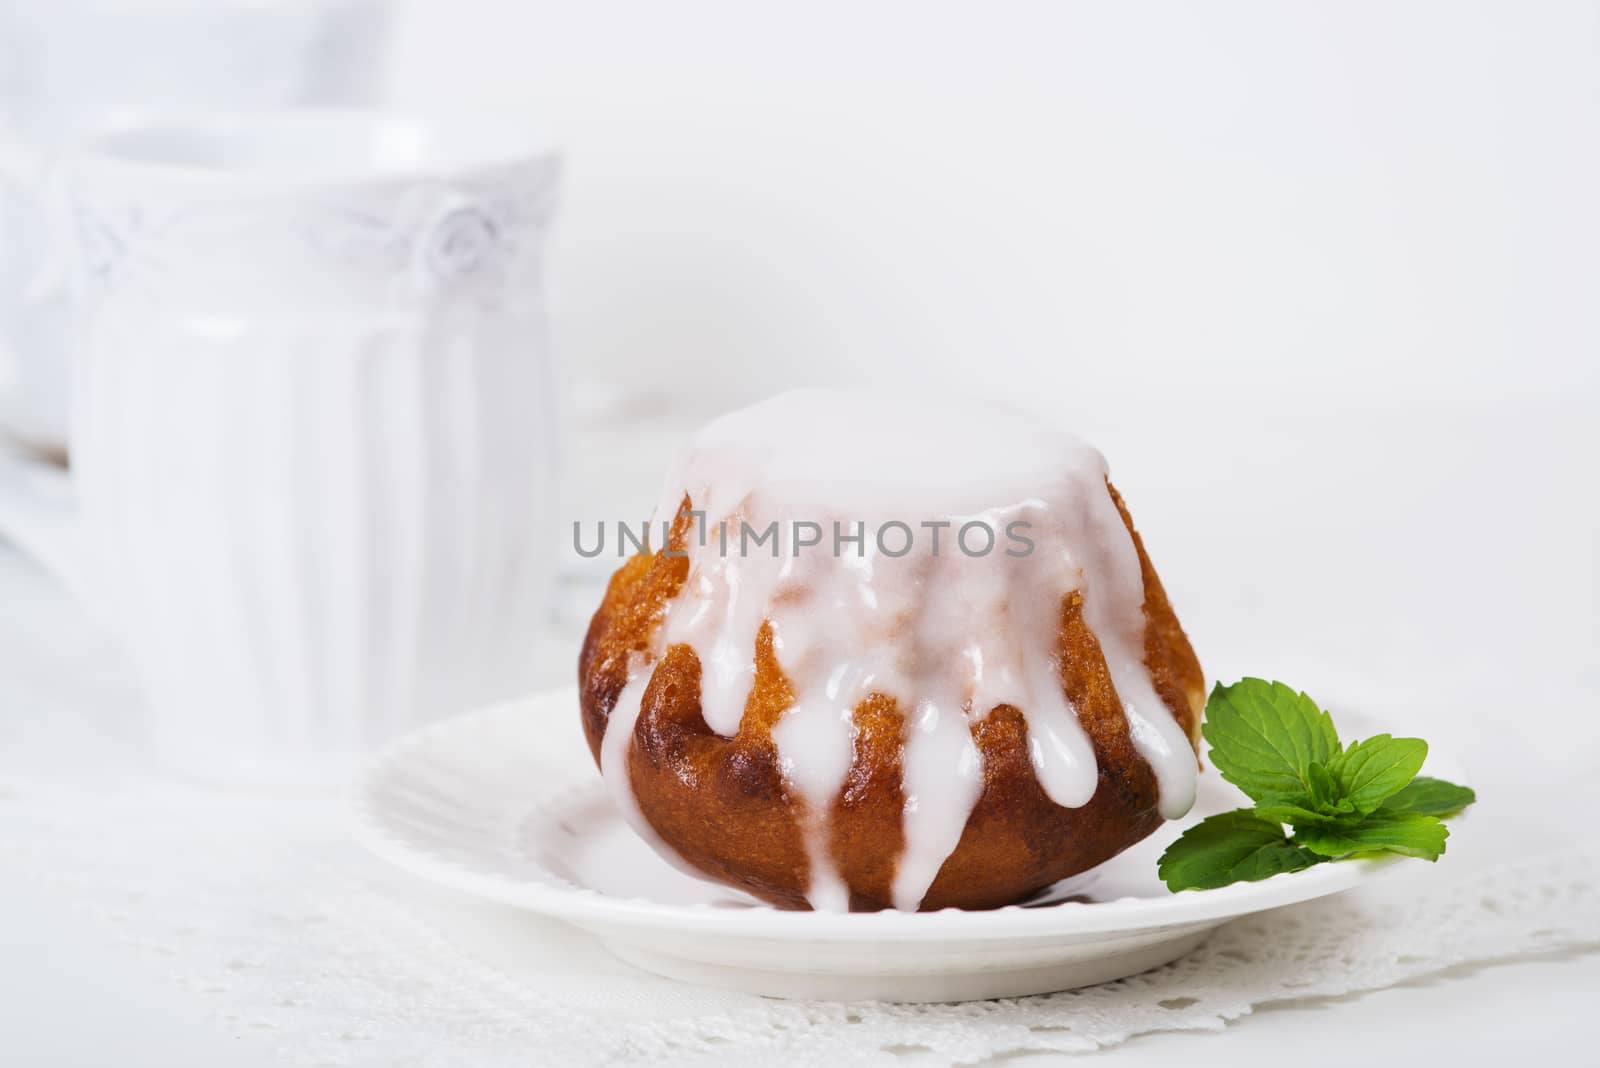 Rum baba cake on plate on light background